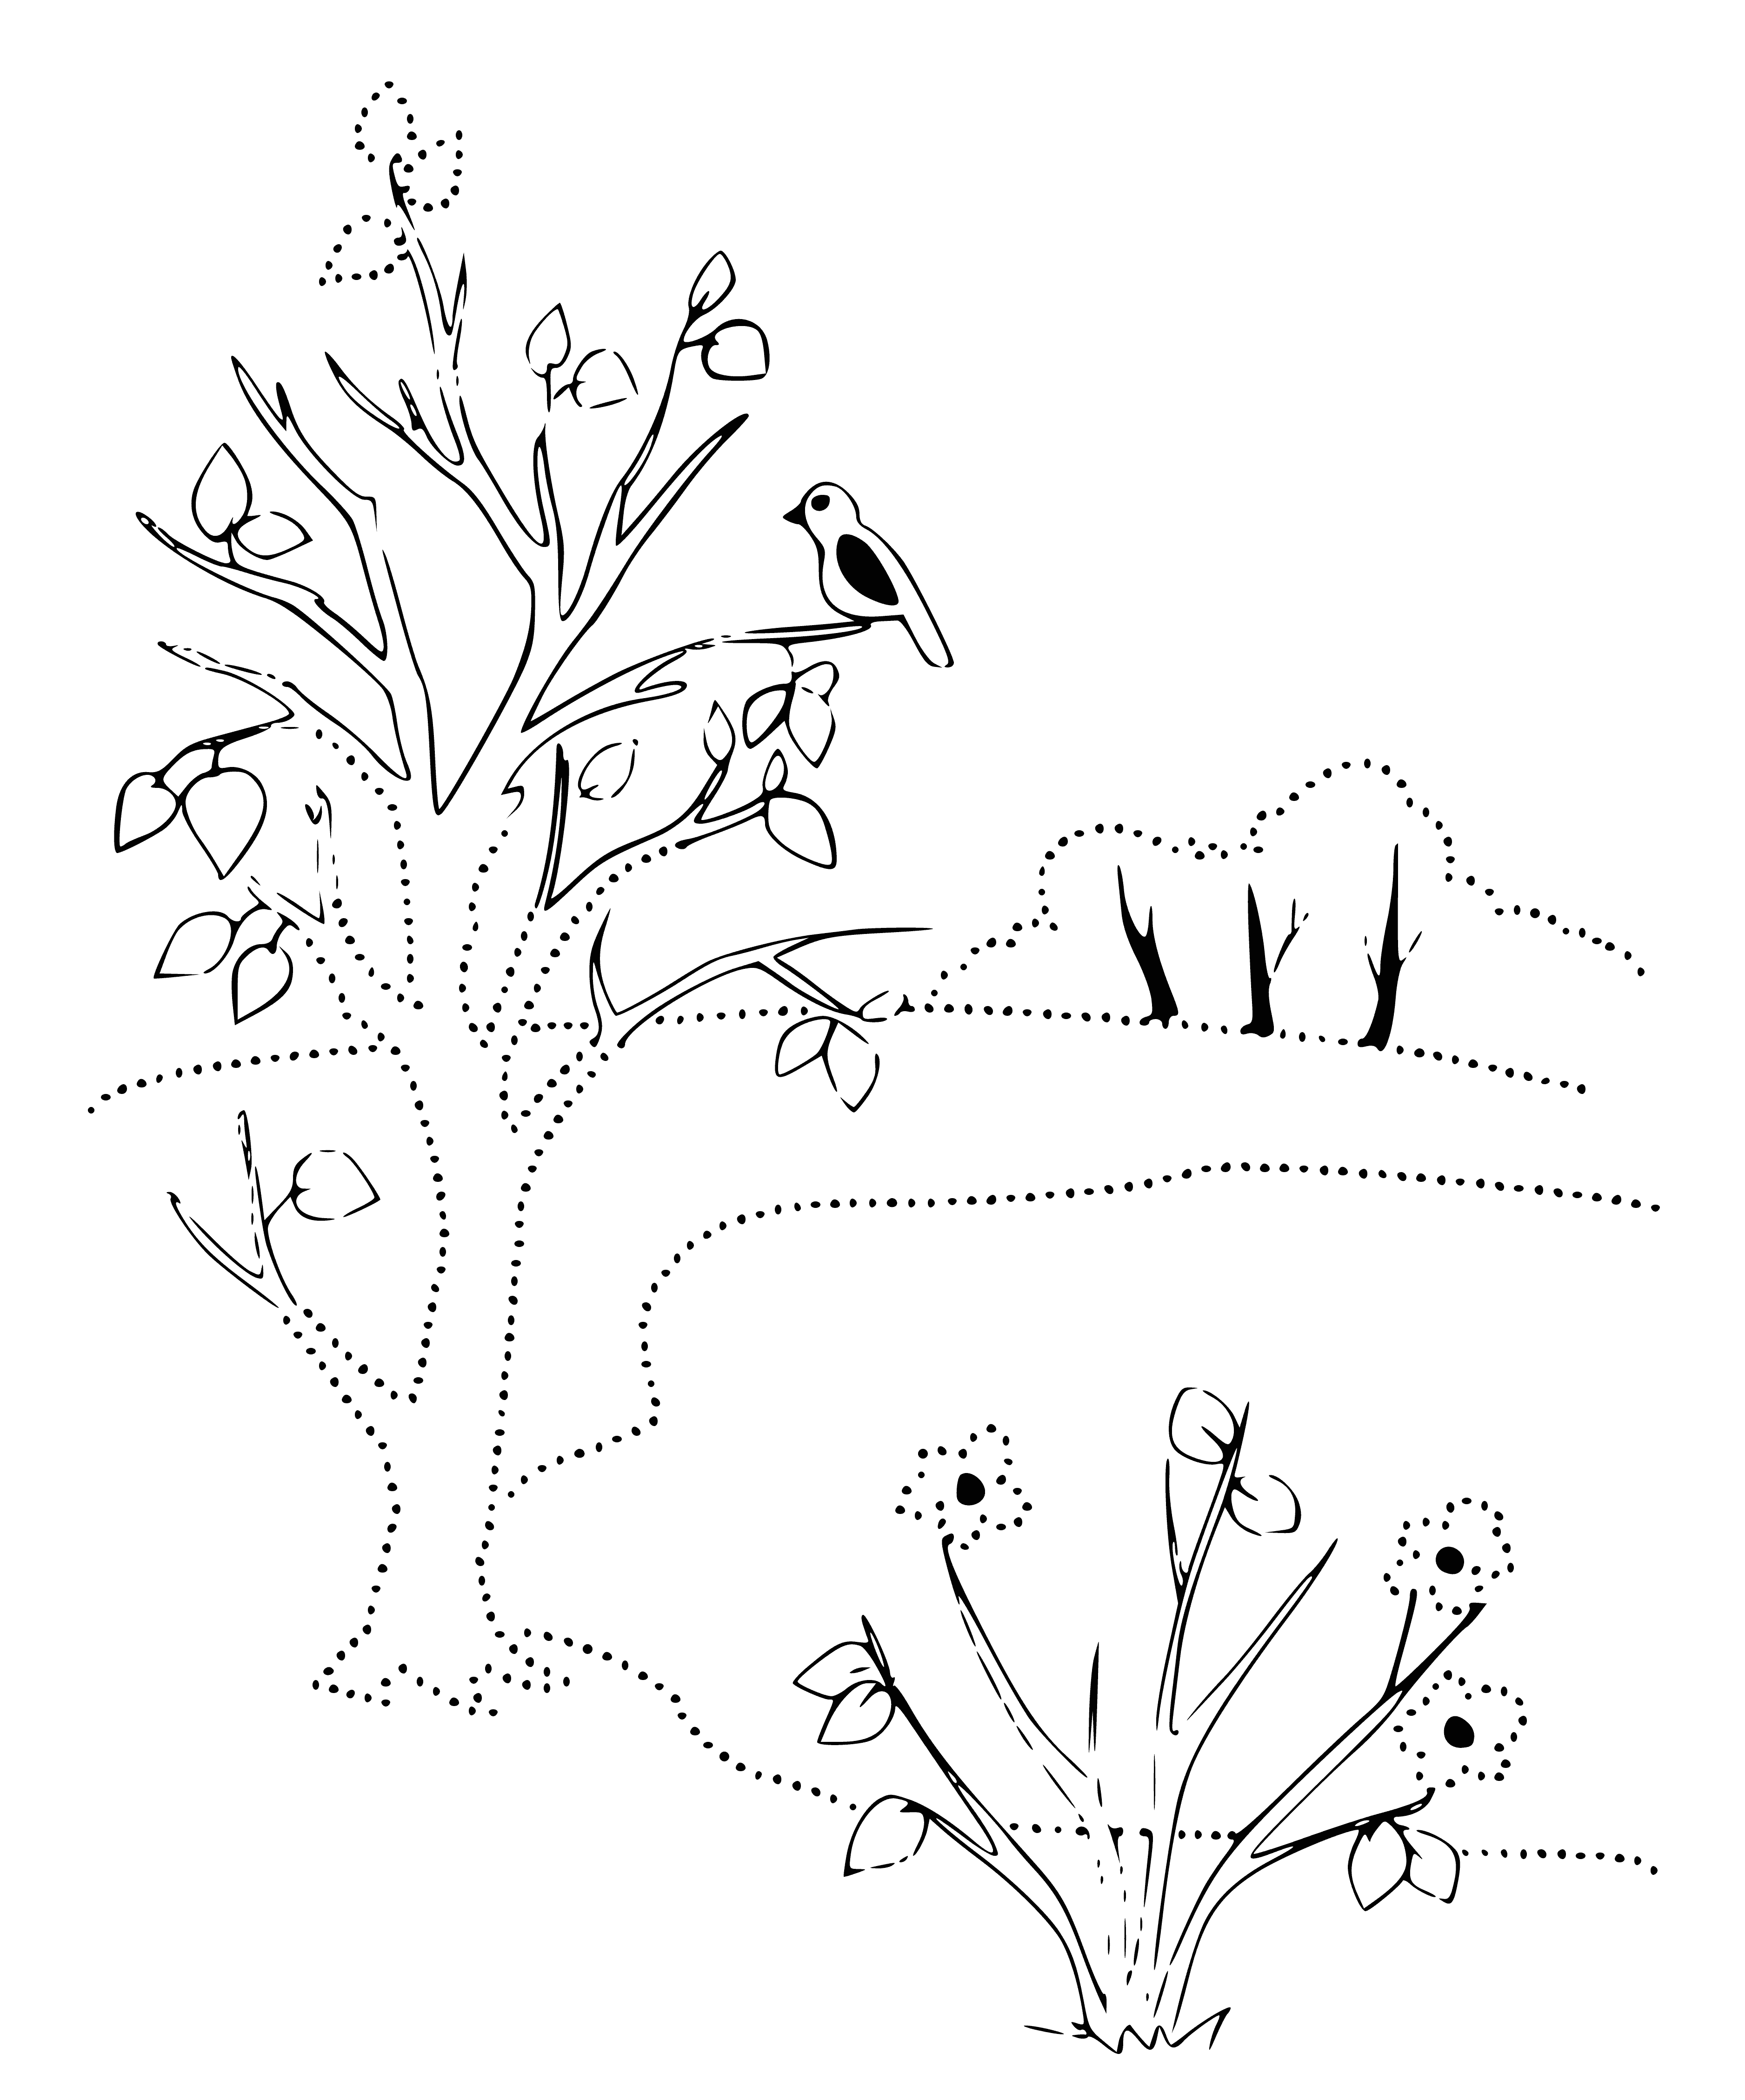 coloring page: Spring is here! #natureisbeautiful 

Spring is here! Flowers, trees, and grass blooming, reminding us of the beauty of nature. #natureisbeautiful